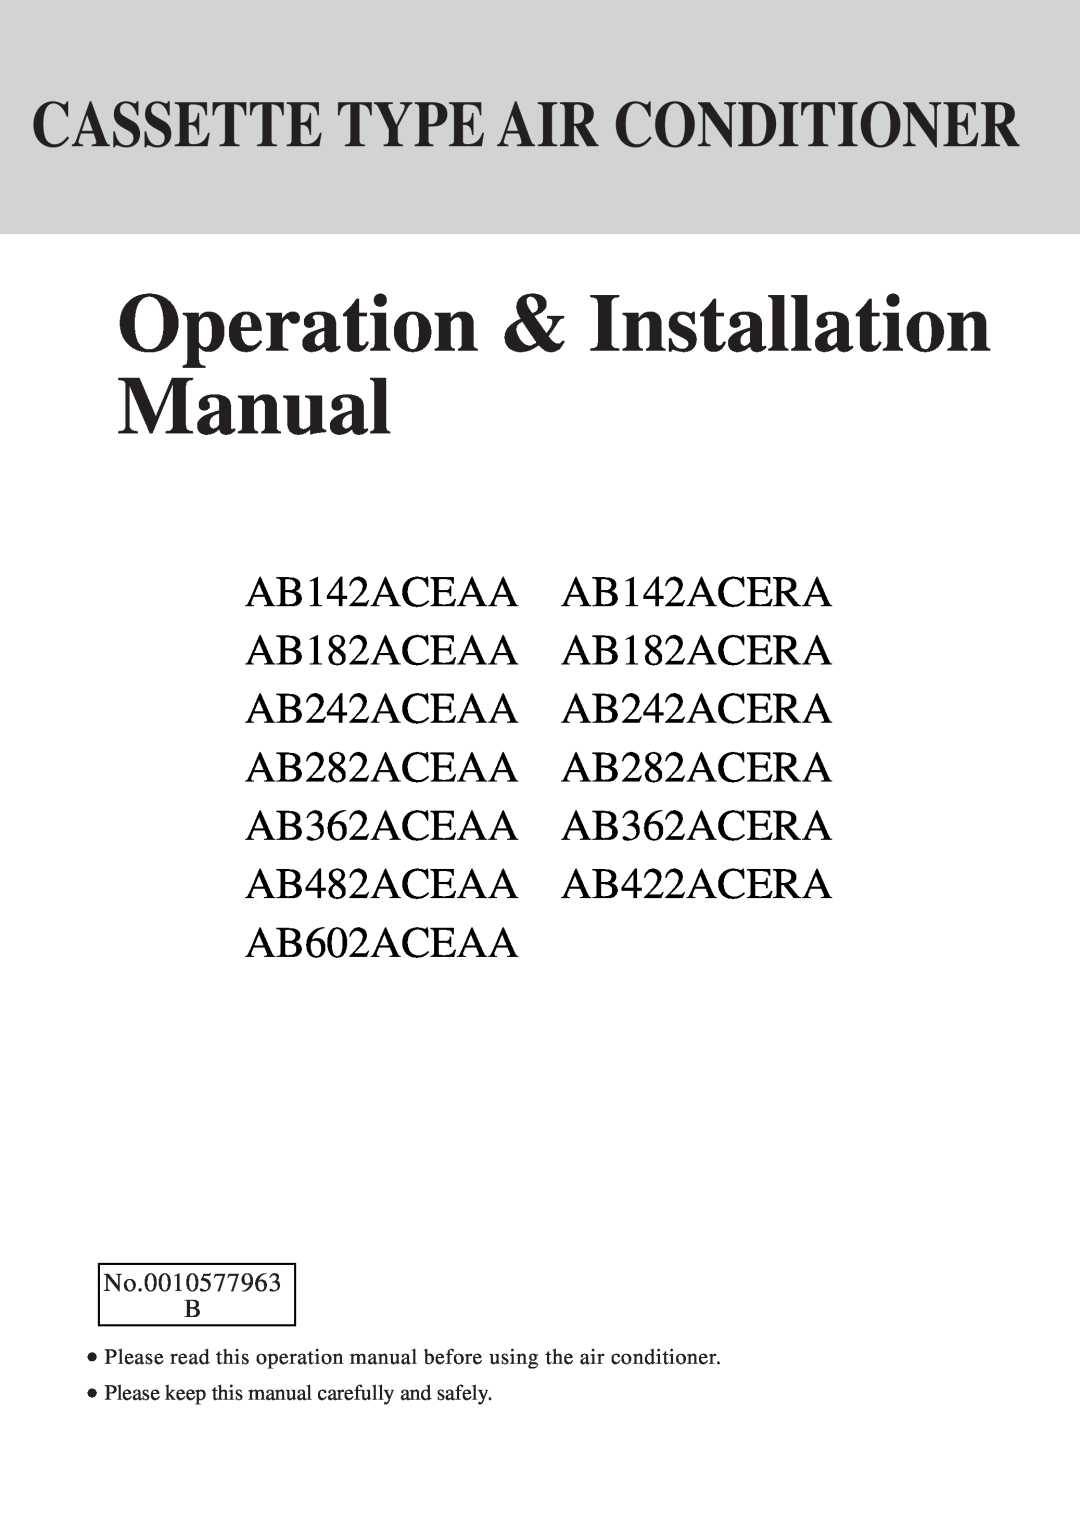 Haier AB142ACEAA, AB422ACERA operation manual Operation & Installation Manual, Cassette Type Air Conditioner, AB602ACEAA 